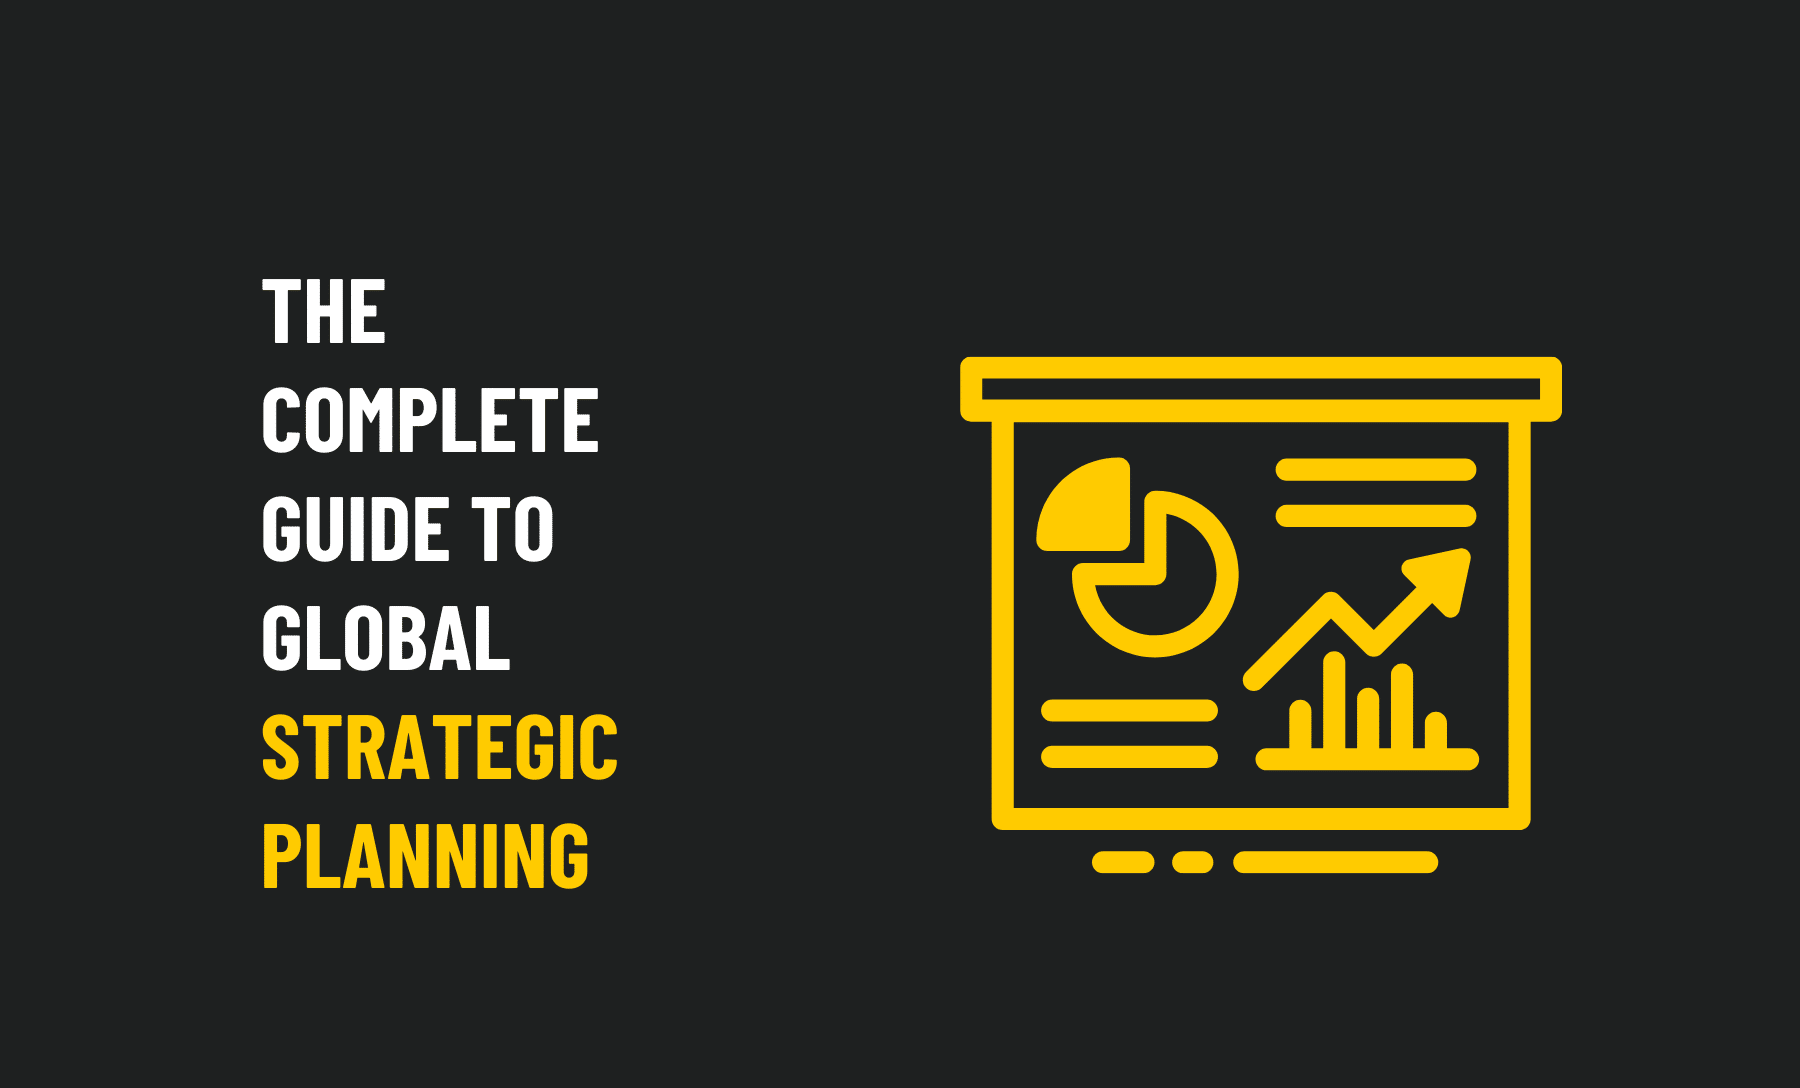 The Complete Guide to Global Strategic Planning